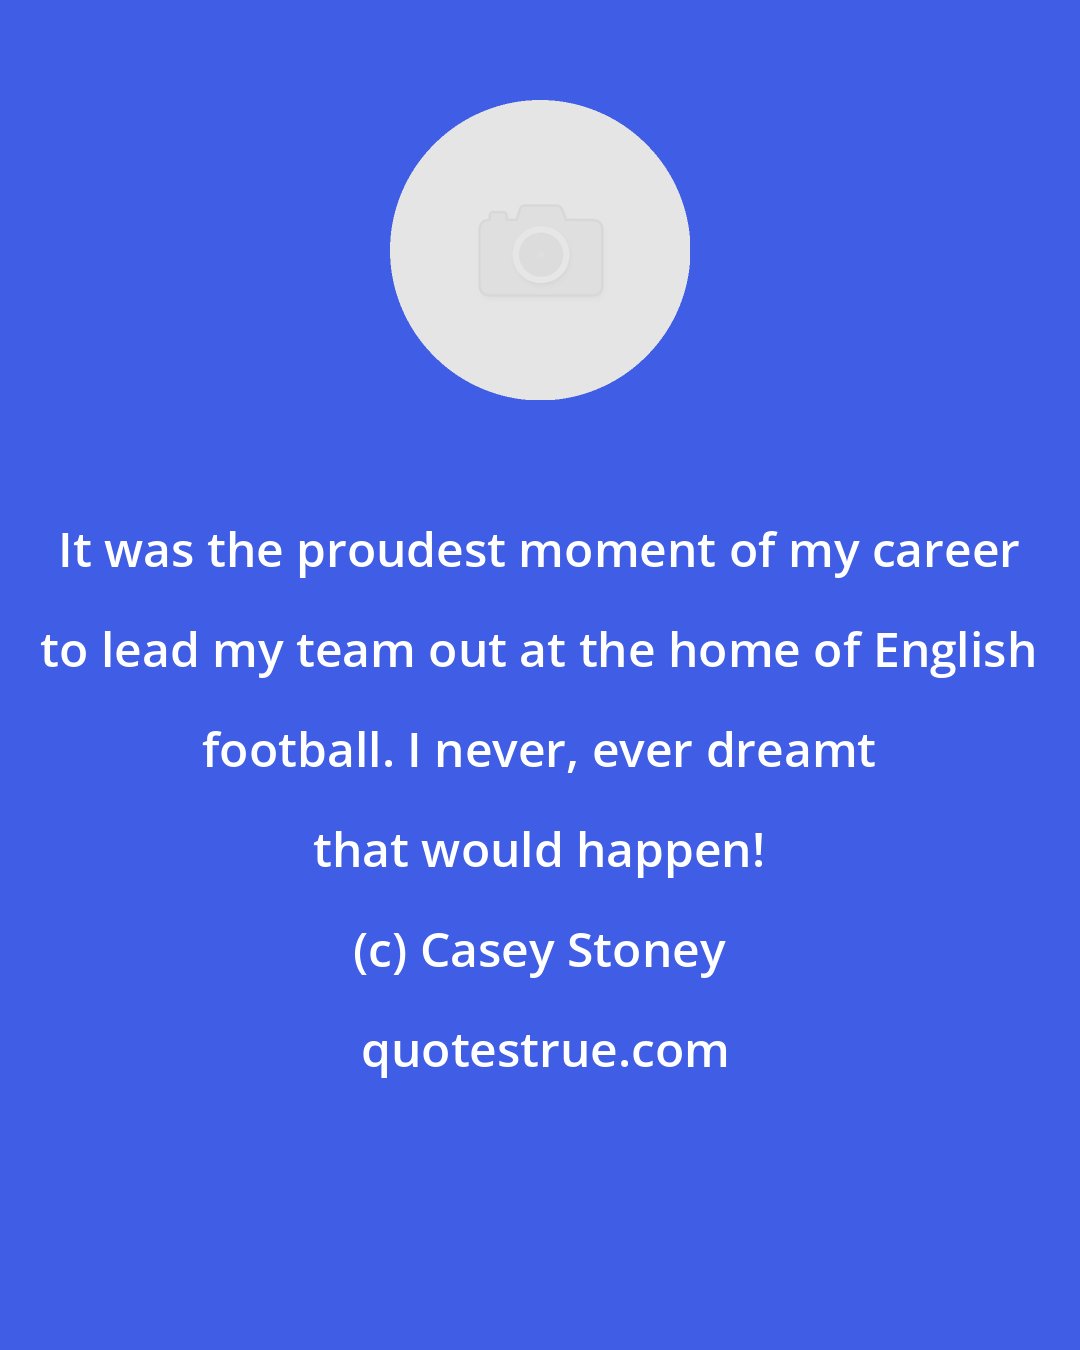 Casey Stoney: It was the proudest moment of my career to lead my team out at the home of English football. I never, ever dreamt that would happen!